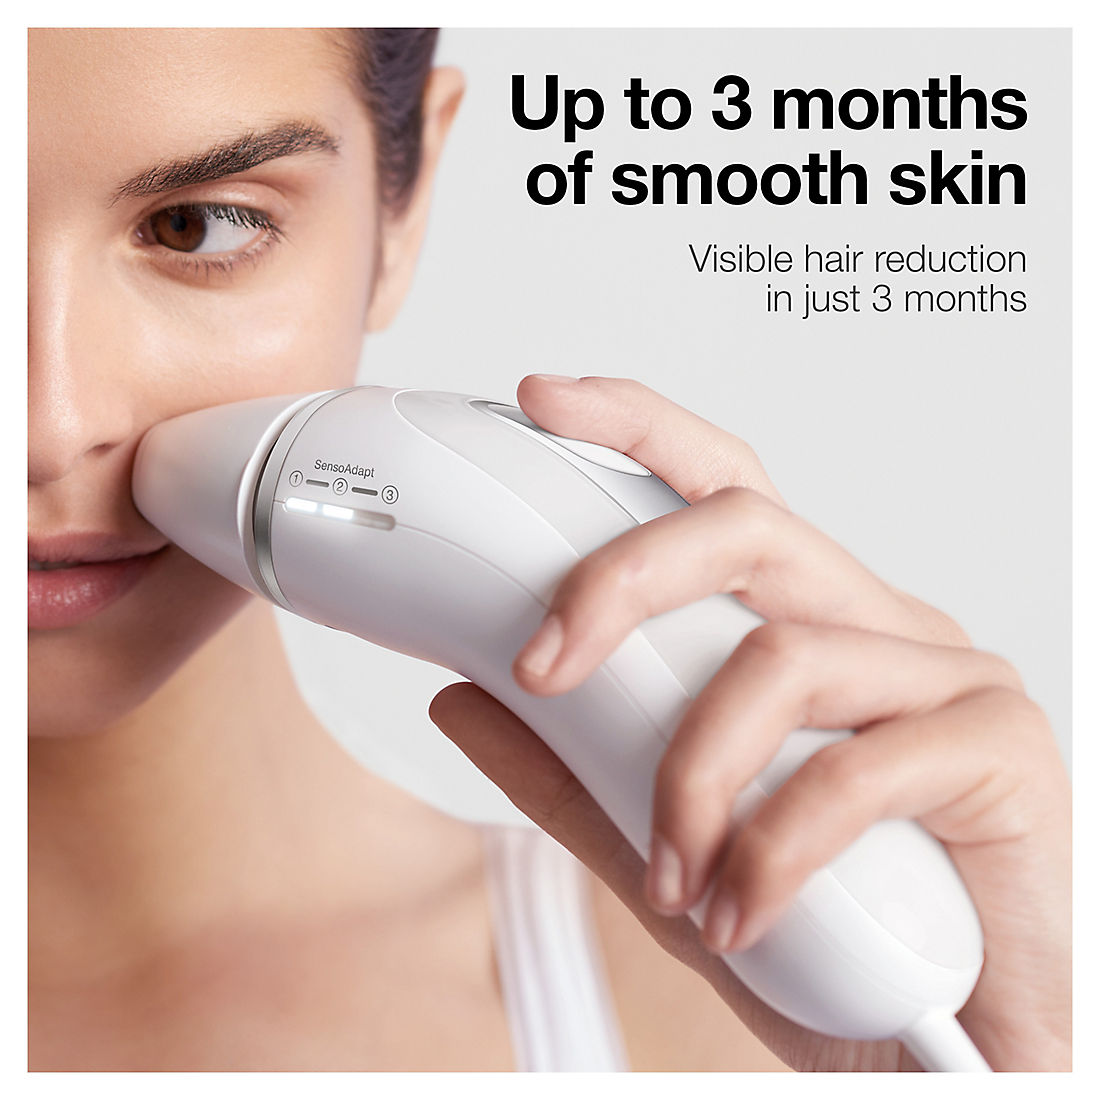 Braun Silk Expert Pro 3 IPL At-Home Hair Removal System for Men